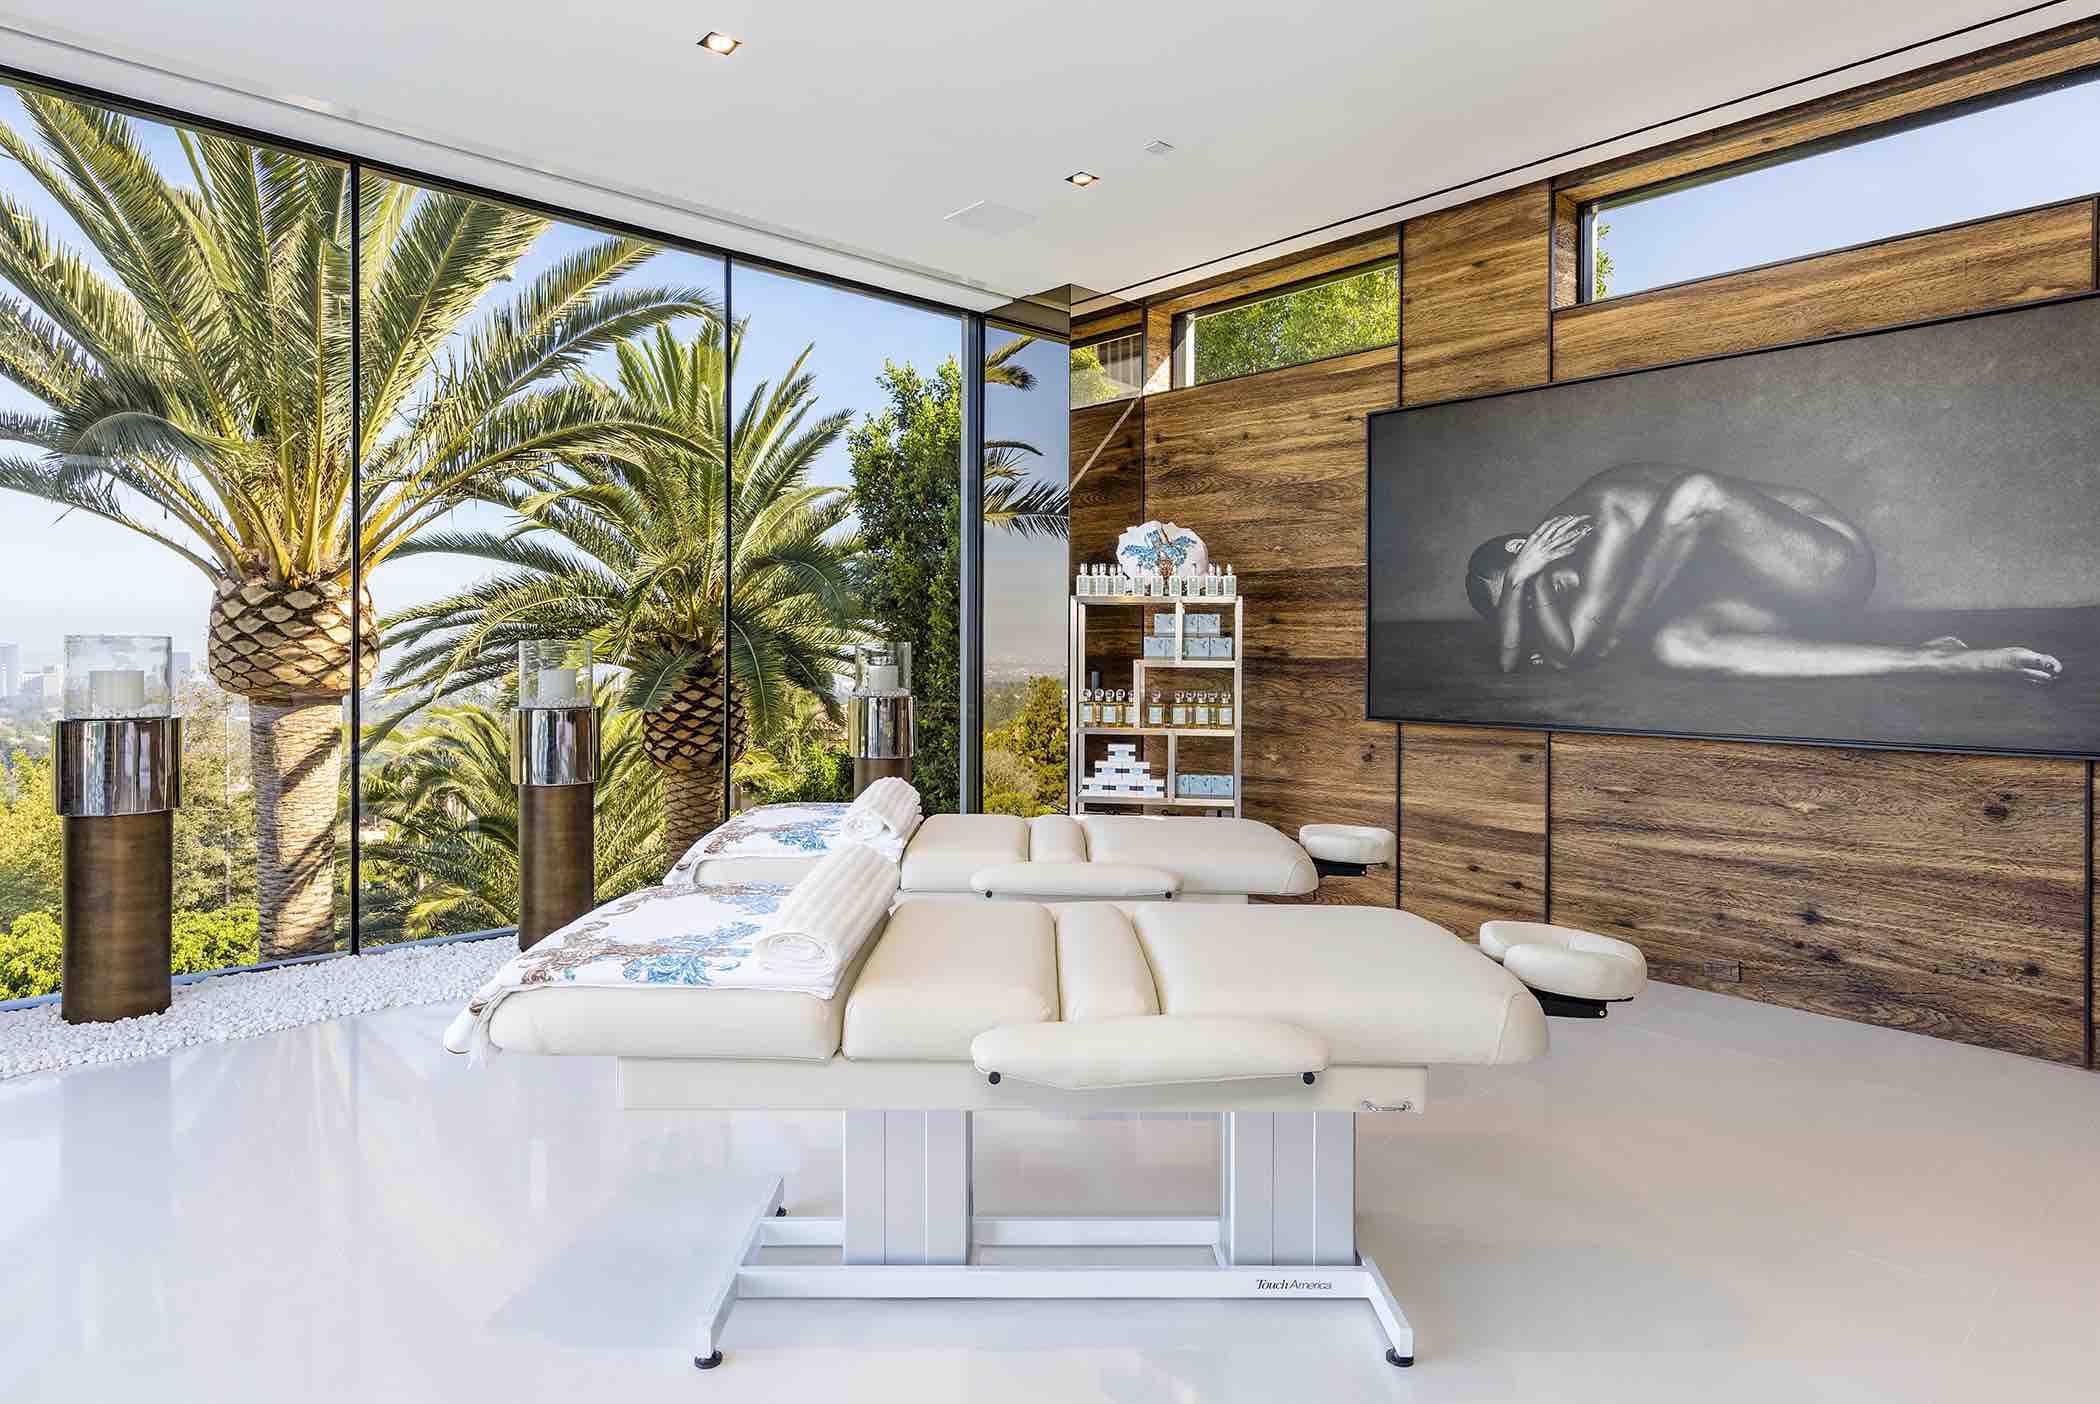 New Status Symbol: Your Own Home Luxury Spa - LUXUO